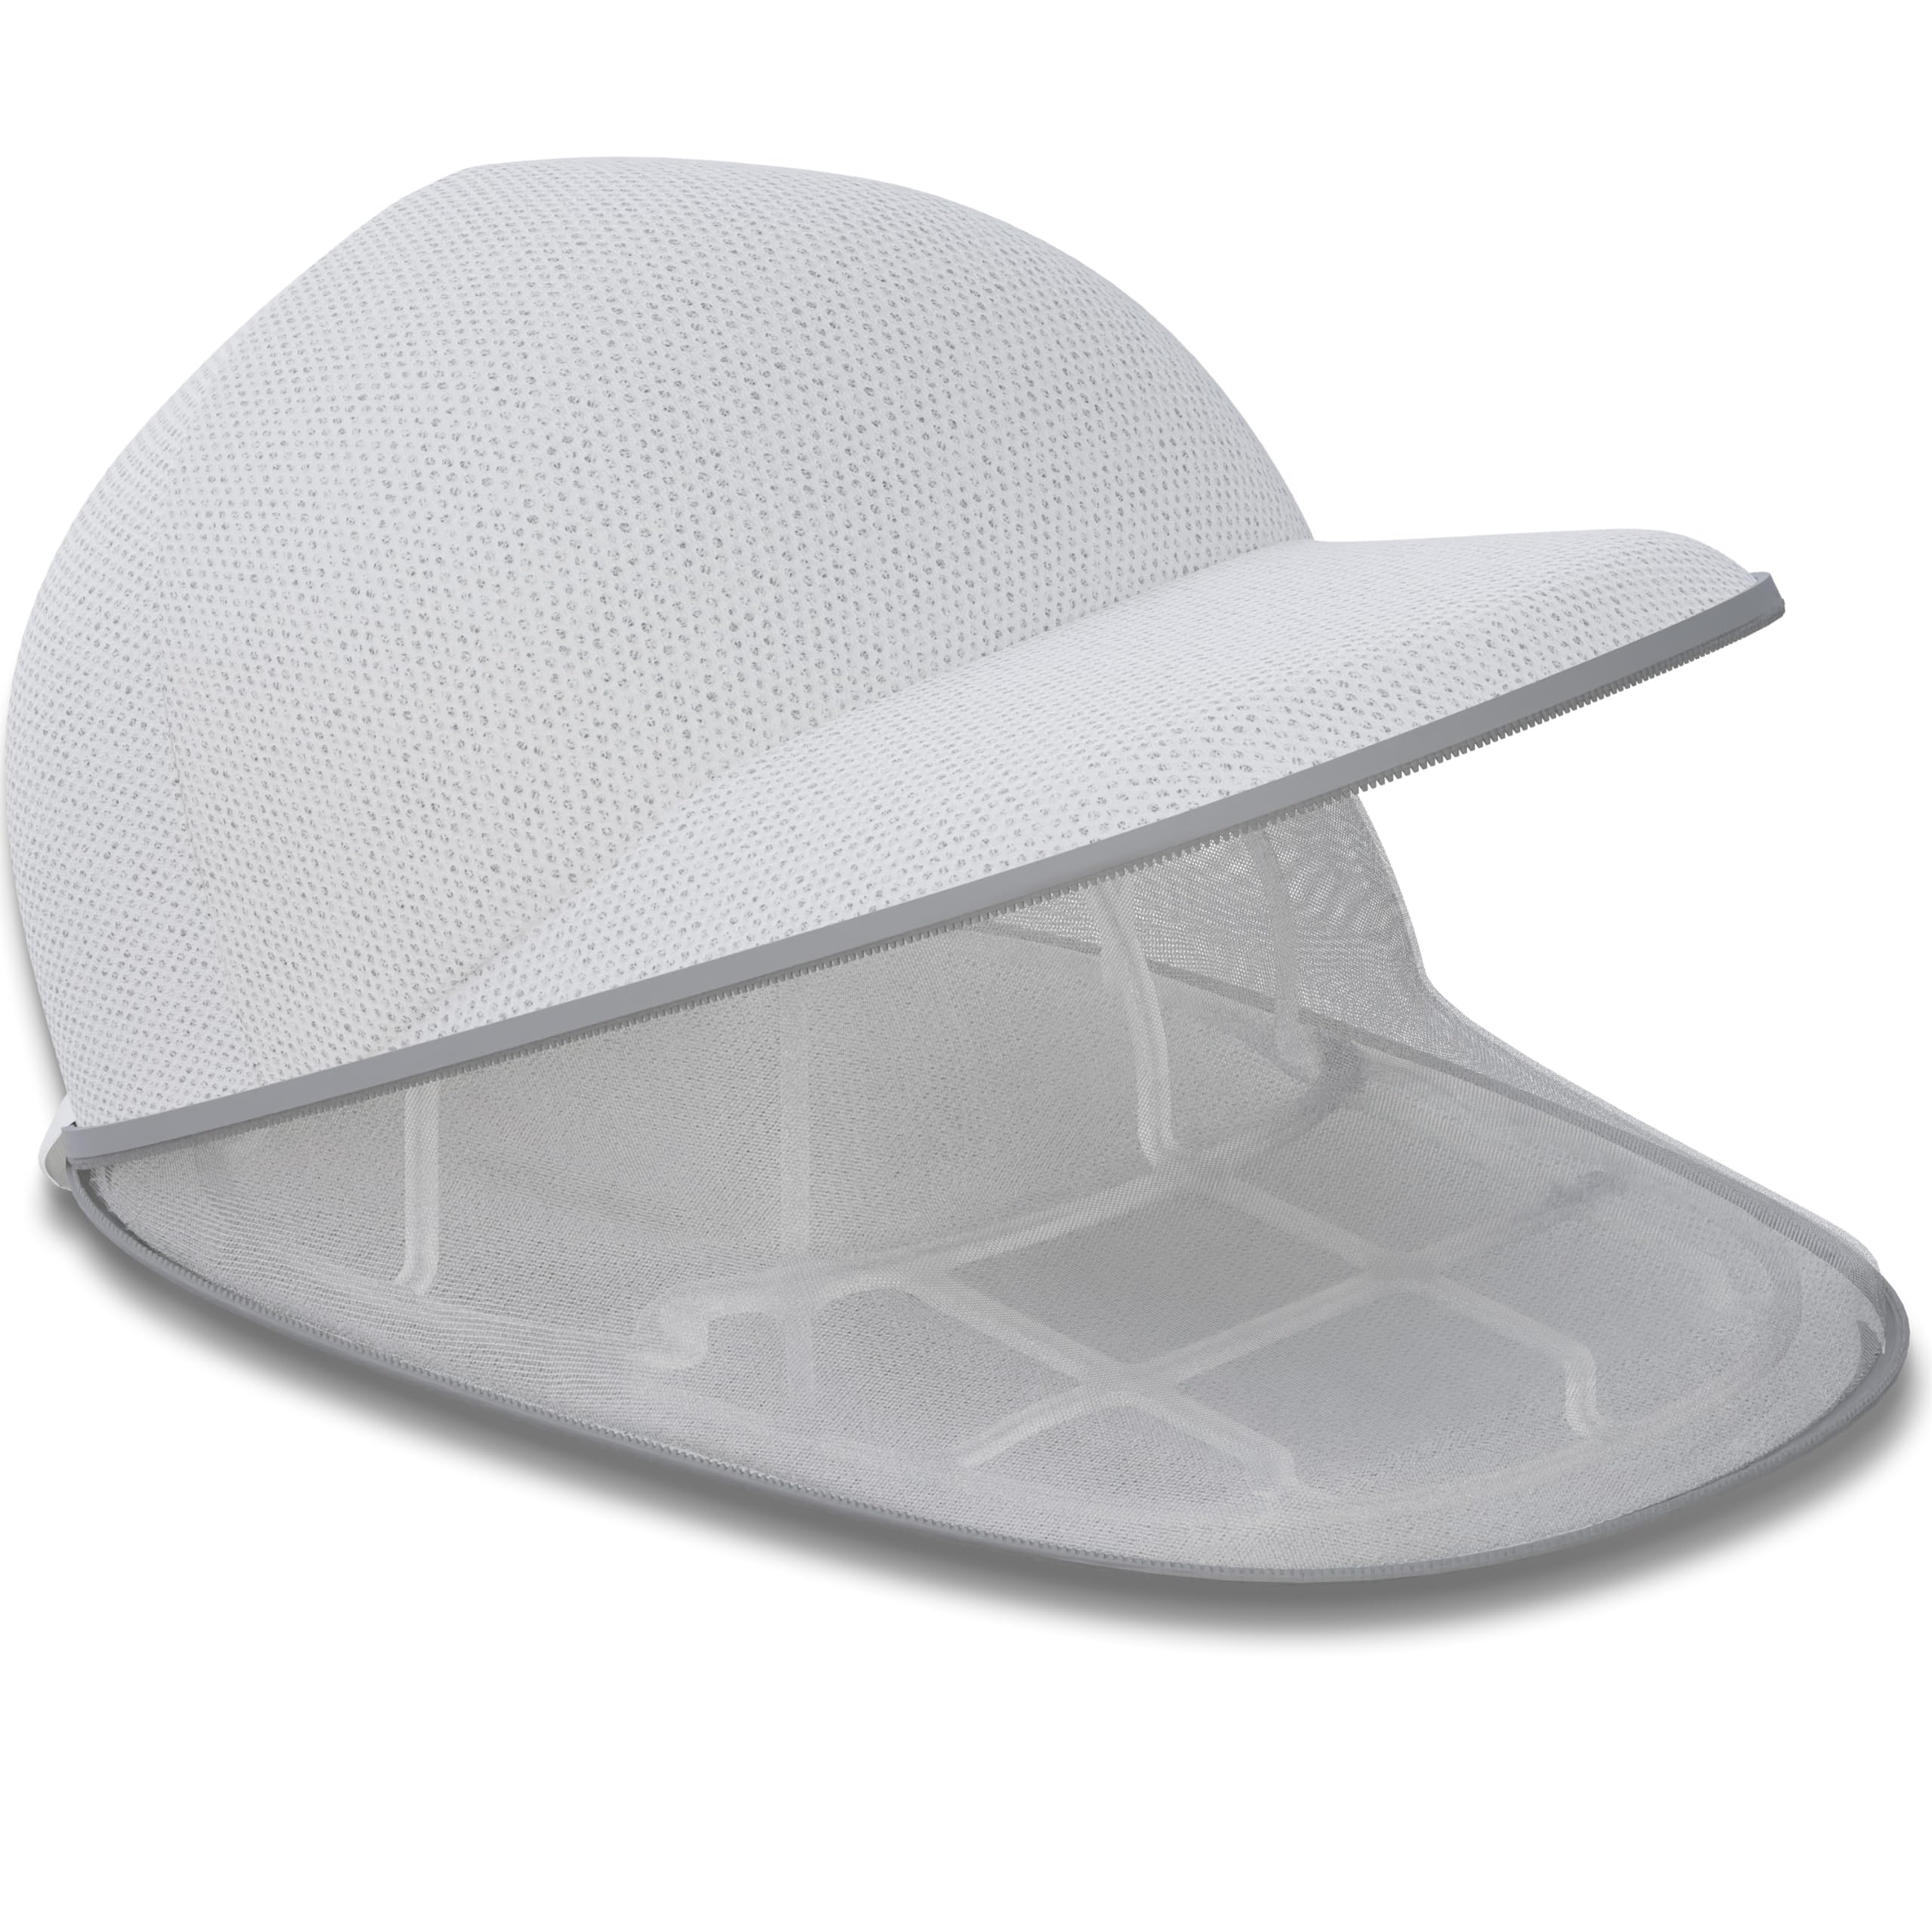 one305 Premium Hat Washer Cage for Washing Machine - Hat Cleaner for Baseball Caps - Hat Laundry Cage for Washer